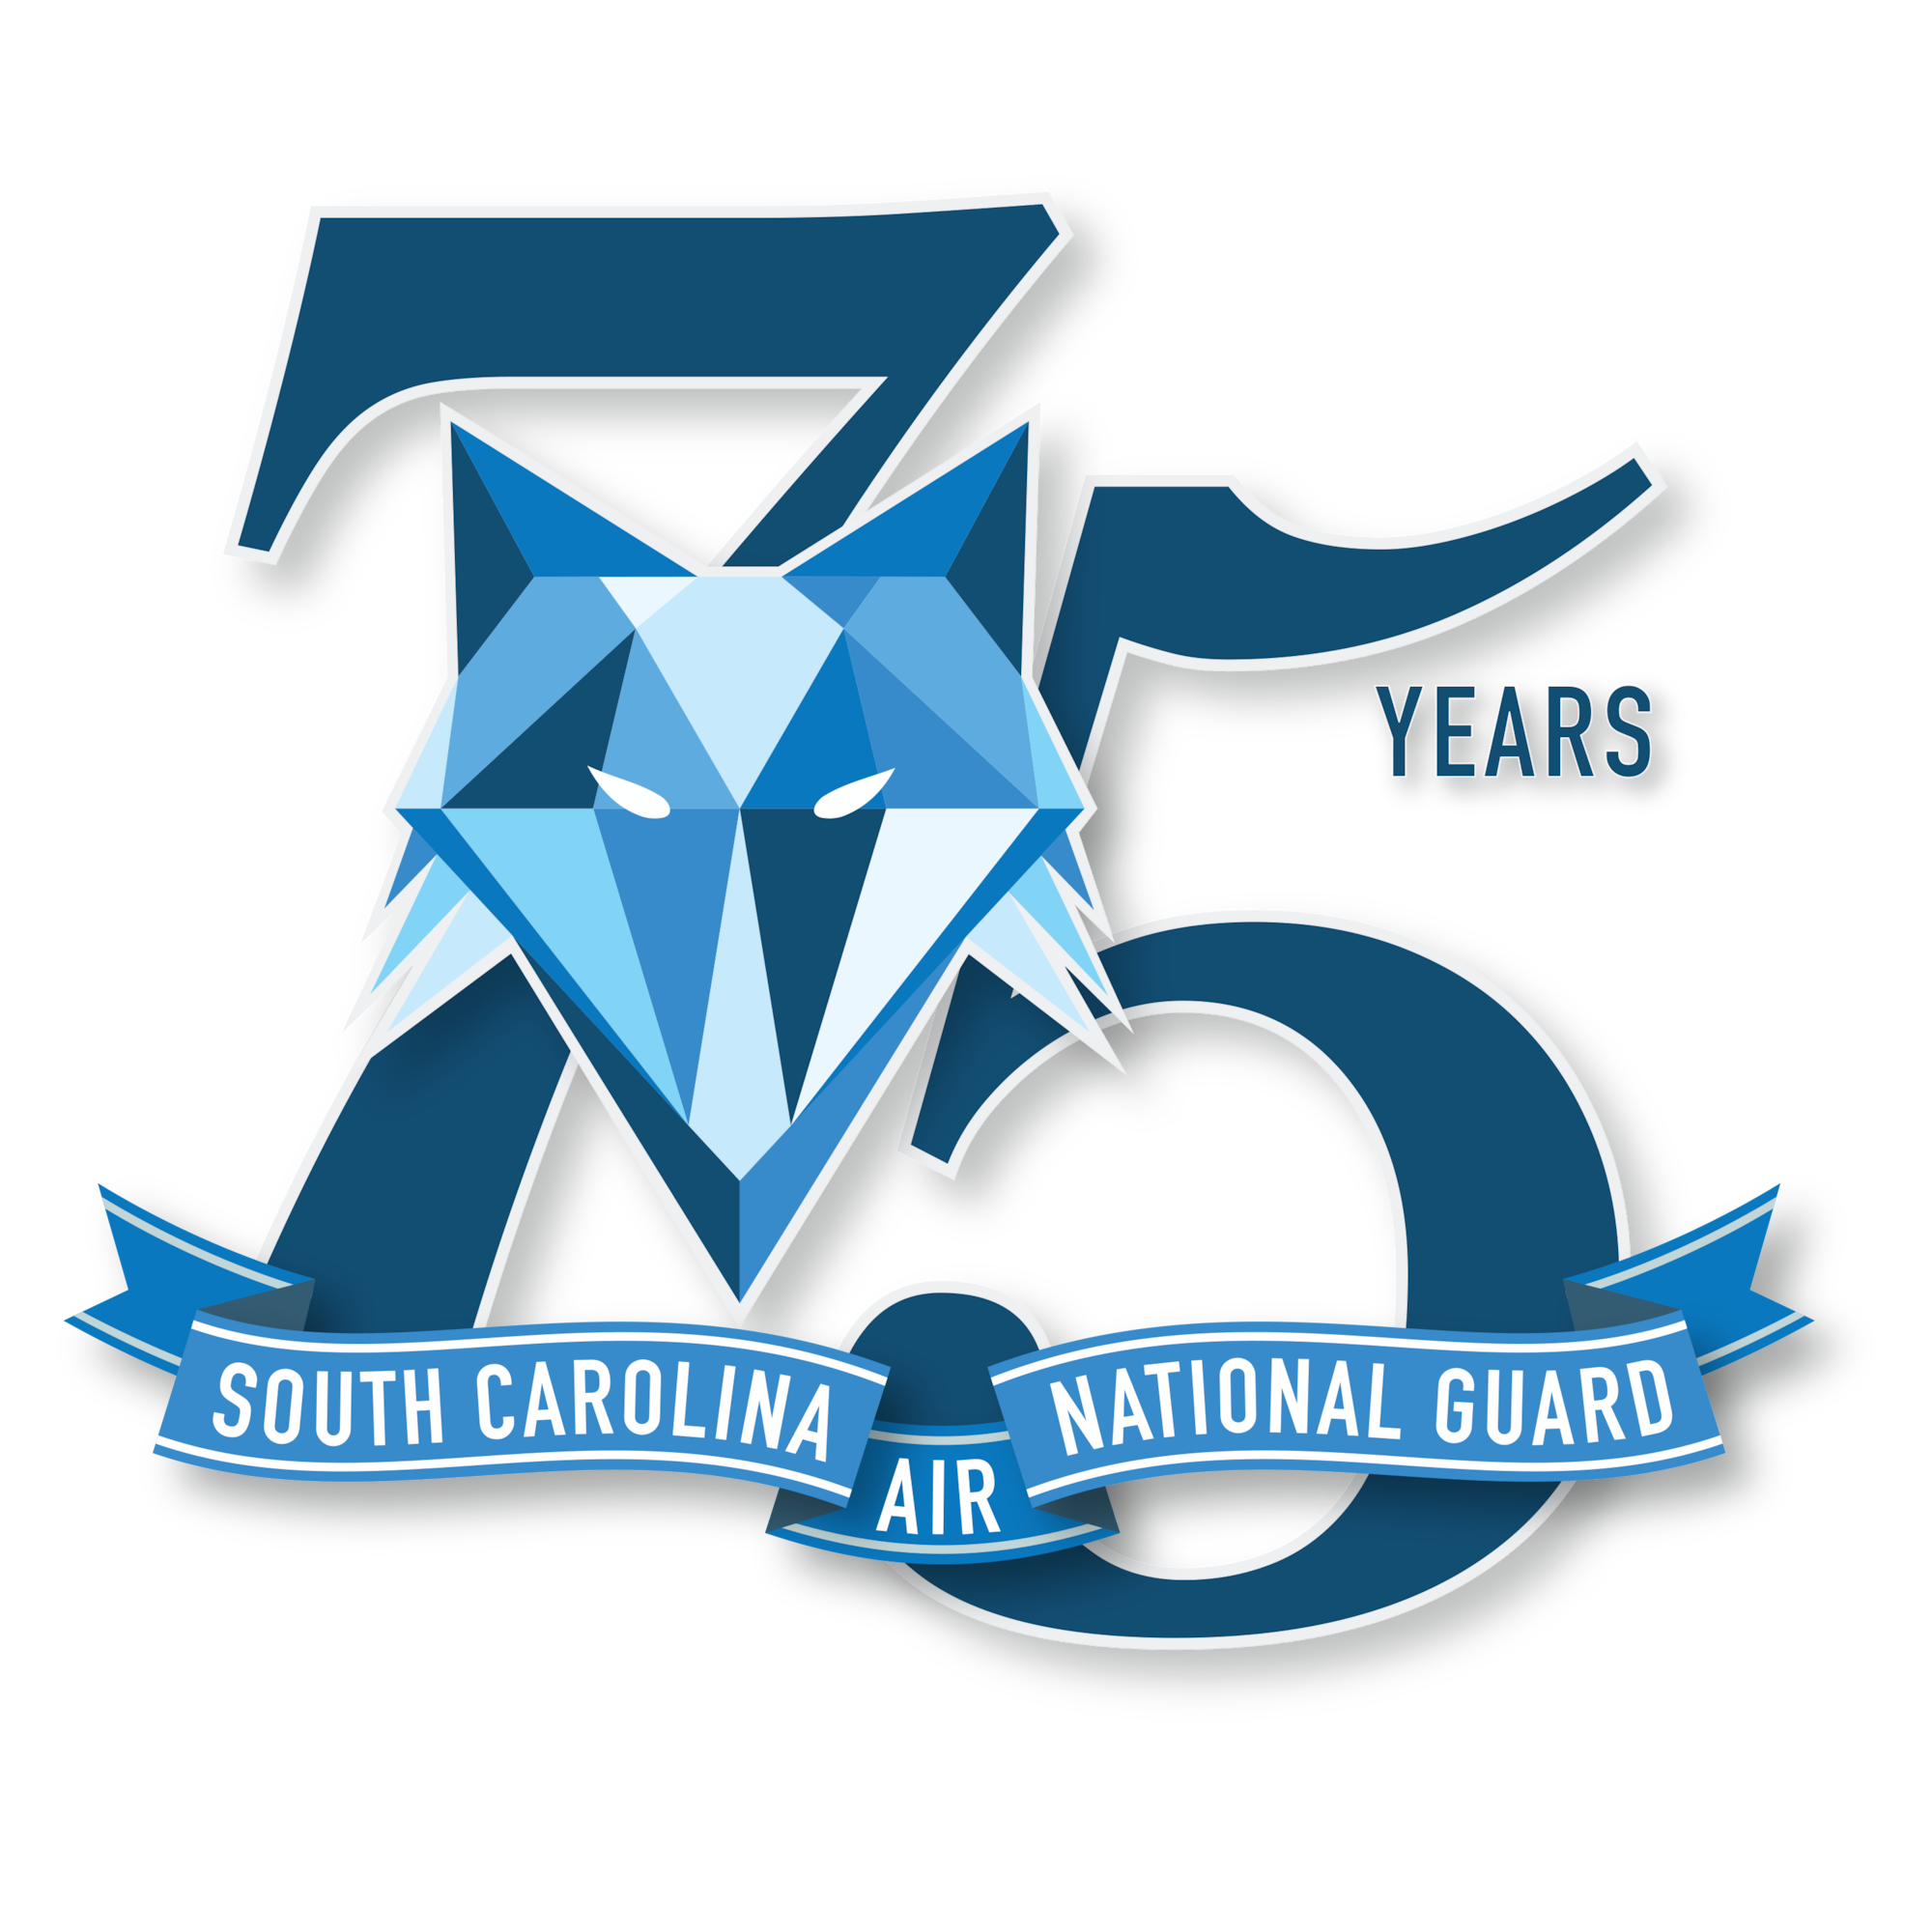 Semper Primus. Latin for Always First. The motto of the South Carolina Air National Guard exemplifies what the men and women of the SCANG have aimed for and achieved over the last 75 years. The Swamp Fox emblem is recognized worldwide as the symbol of excellence in combat capability.

With the SCANG’s Diamond Anniversary on Dec. 9, 2021, it would seem an impossible task to select only 10 highlights from the last 75 years. So many people did so many great things, if we tried to list all of them it might take years to do it. However, here is a subjective list of what are the most notable achievements and events that have happened so far.